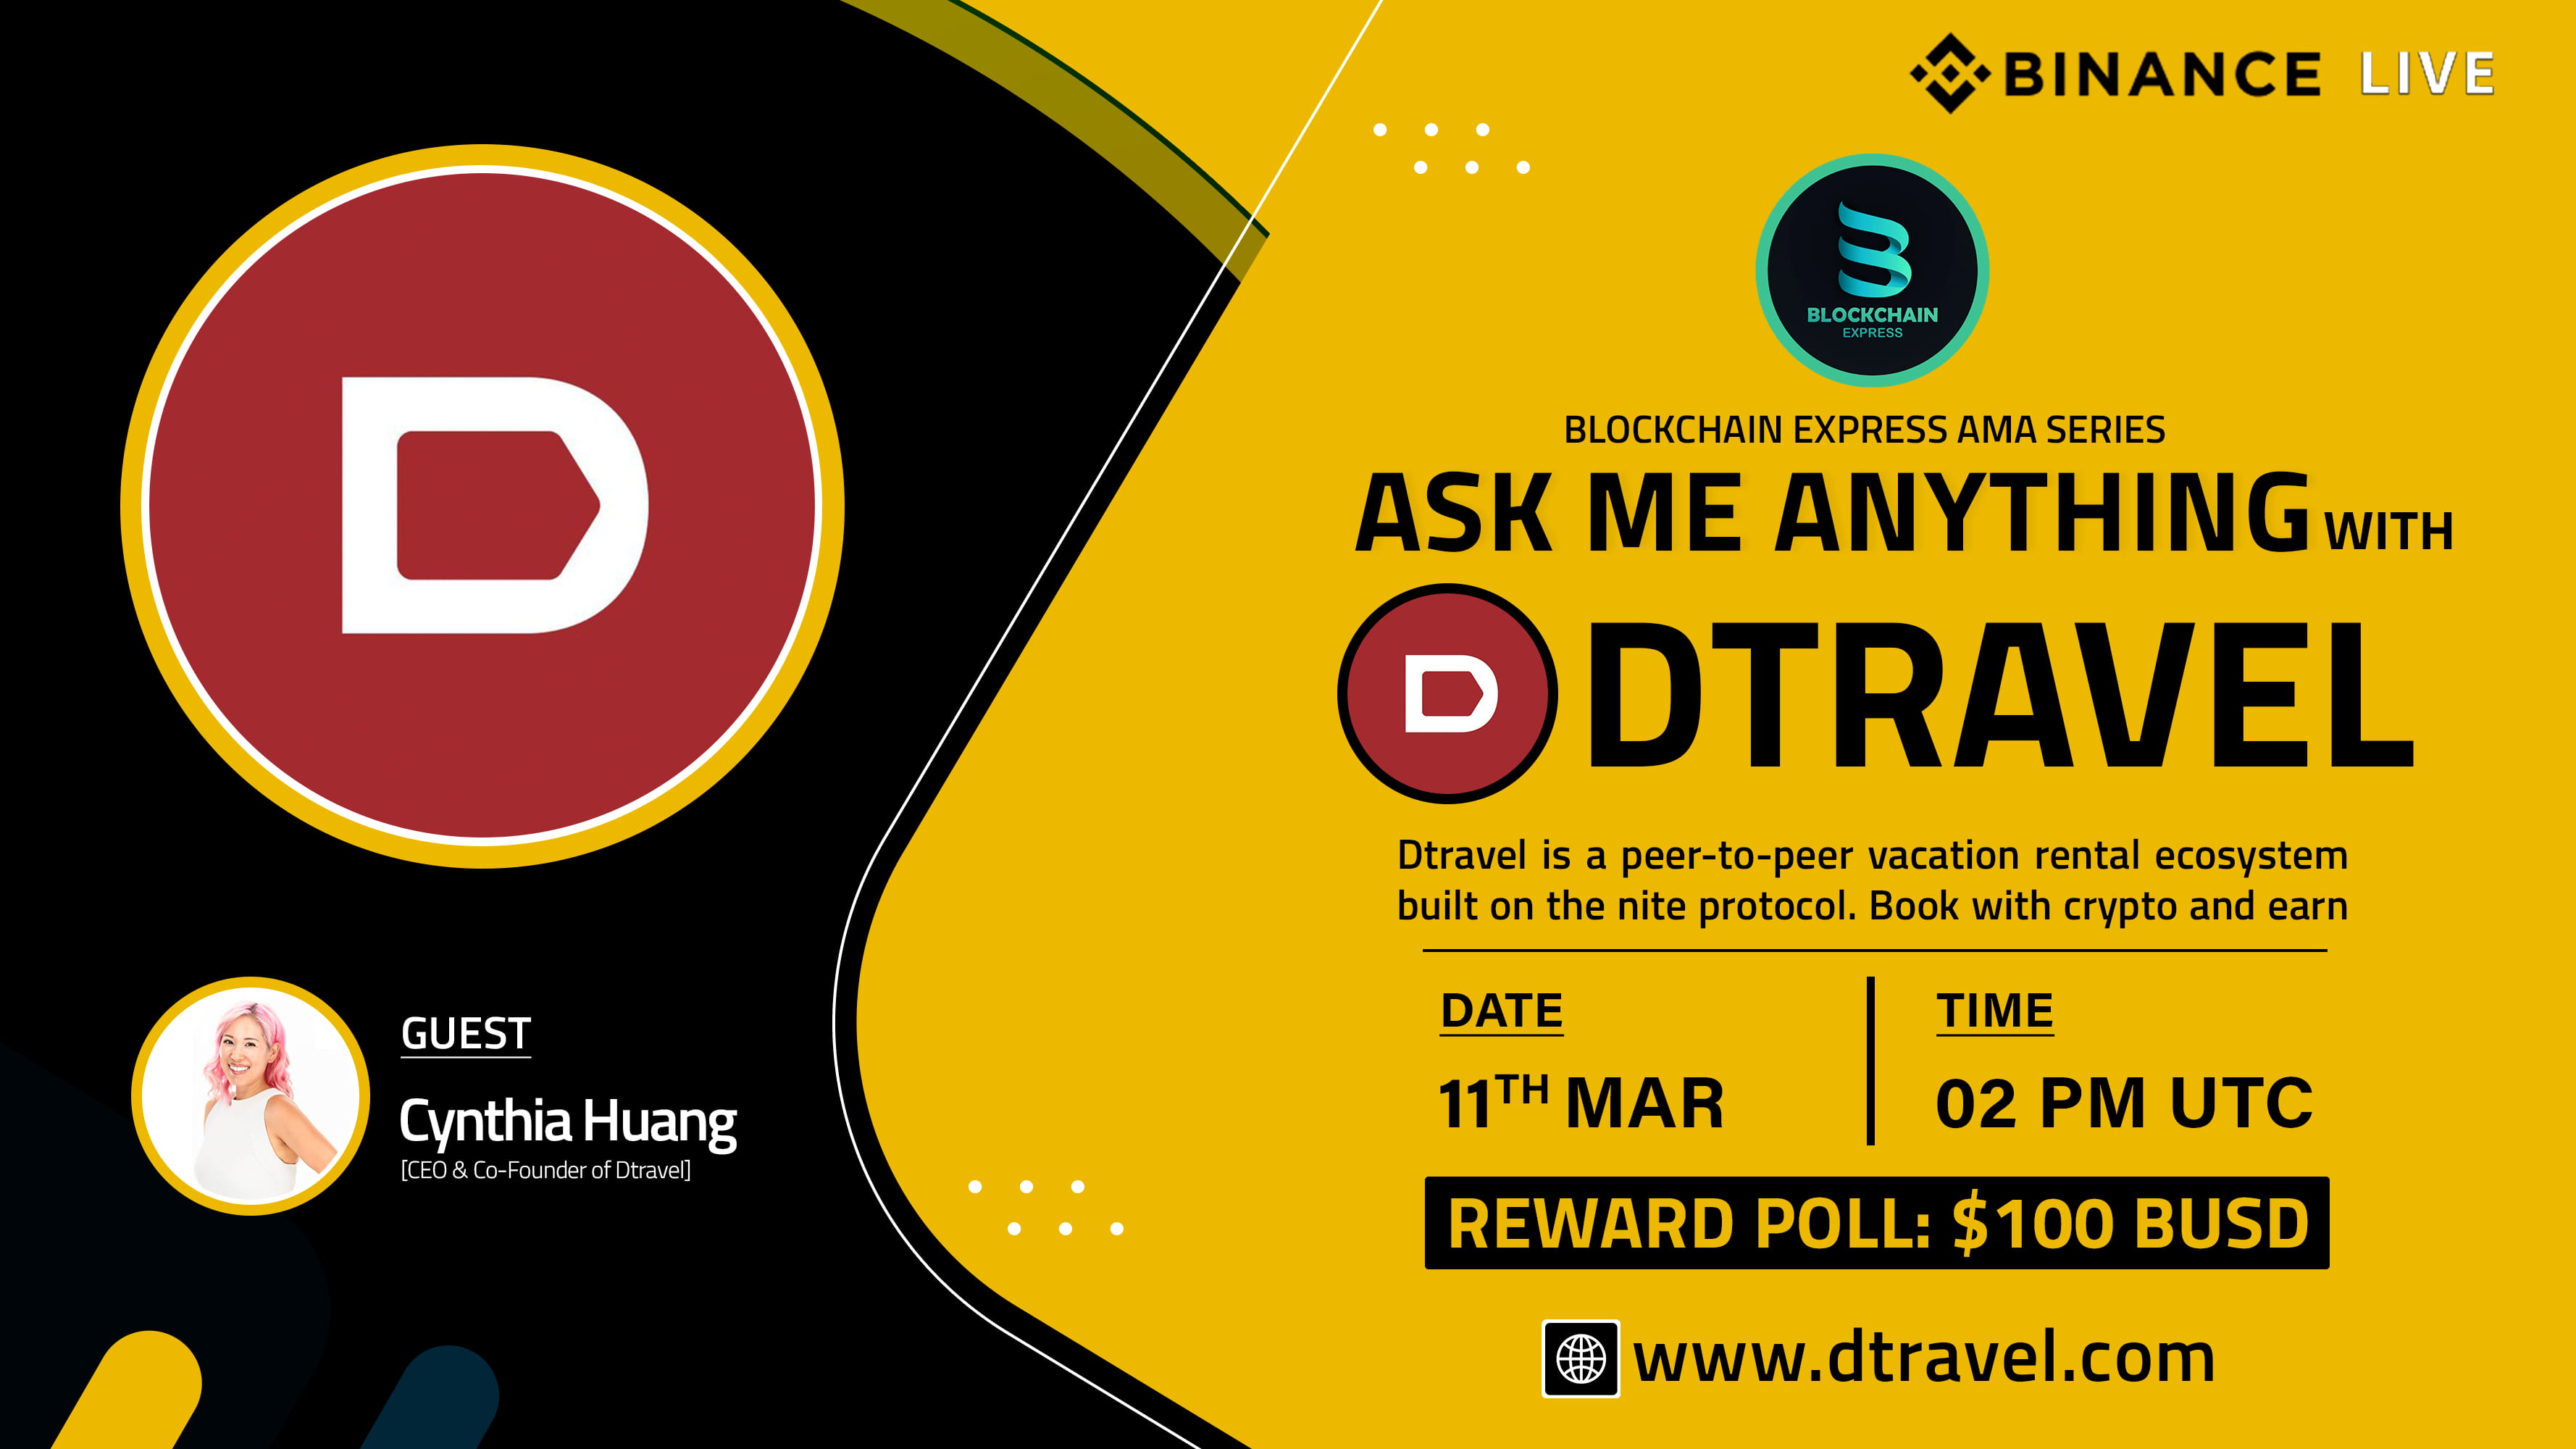 ₿lockchain Express will be hosting an session with" Dtravel Community "